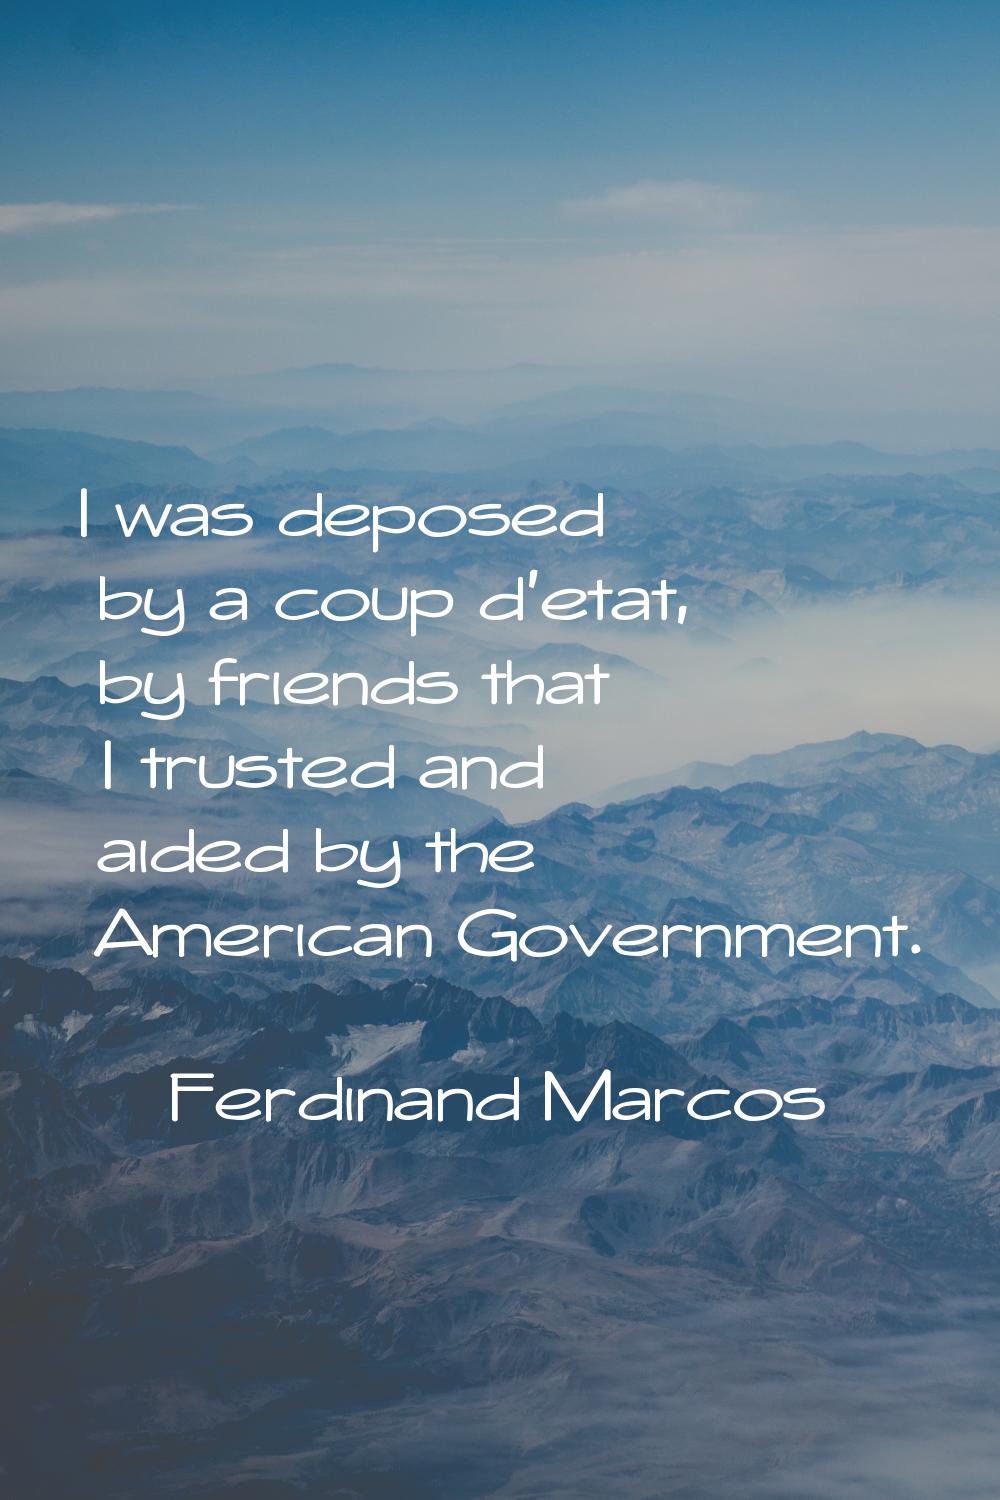 I was deposed by a coup d'etat, by friends that I trusted and aided by the American Government.